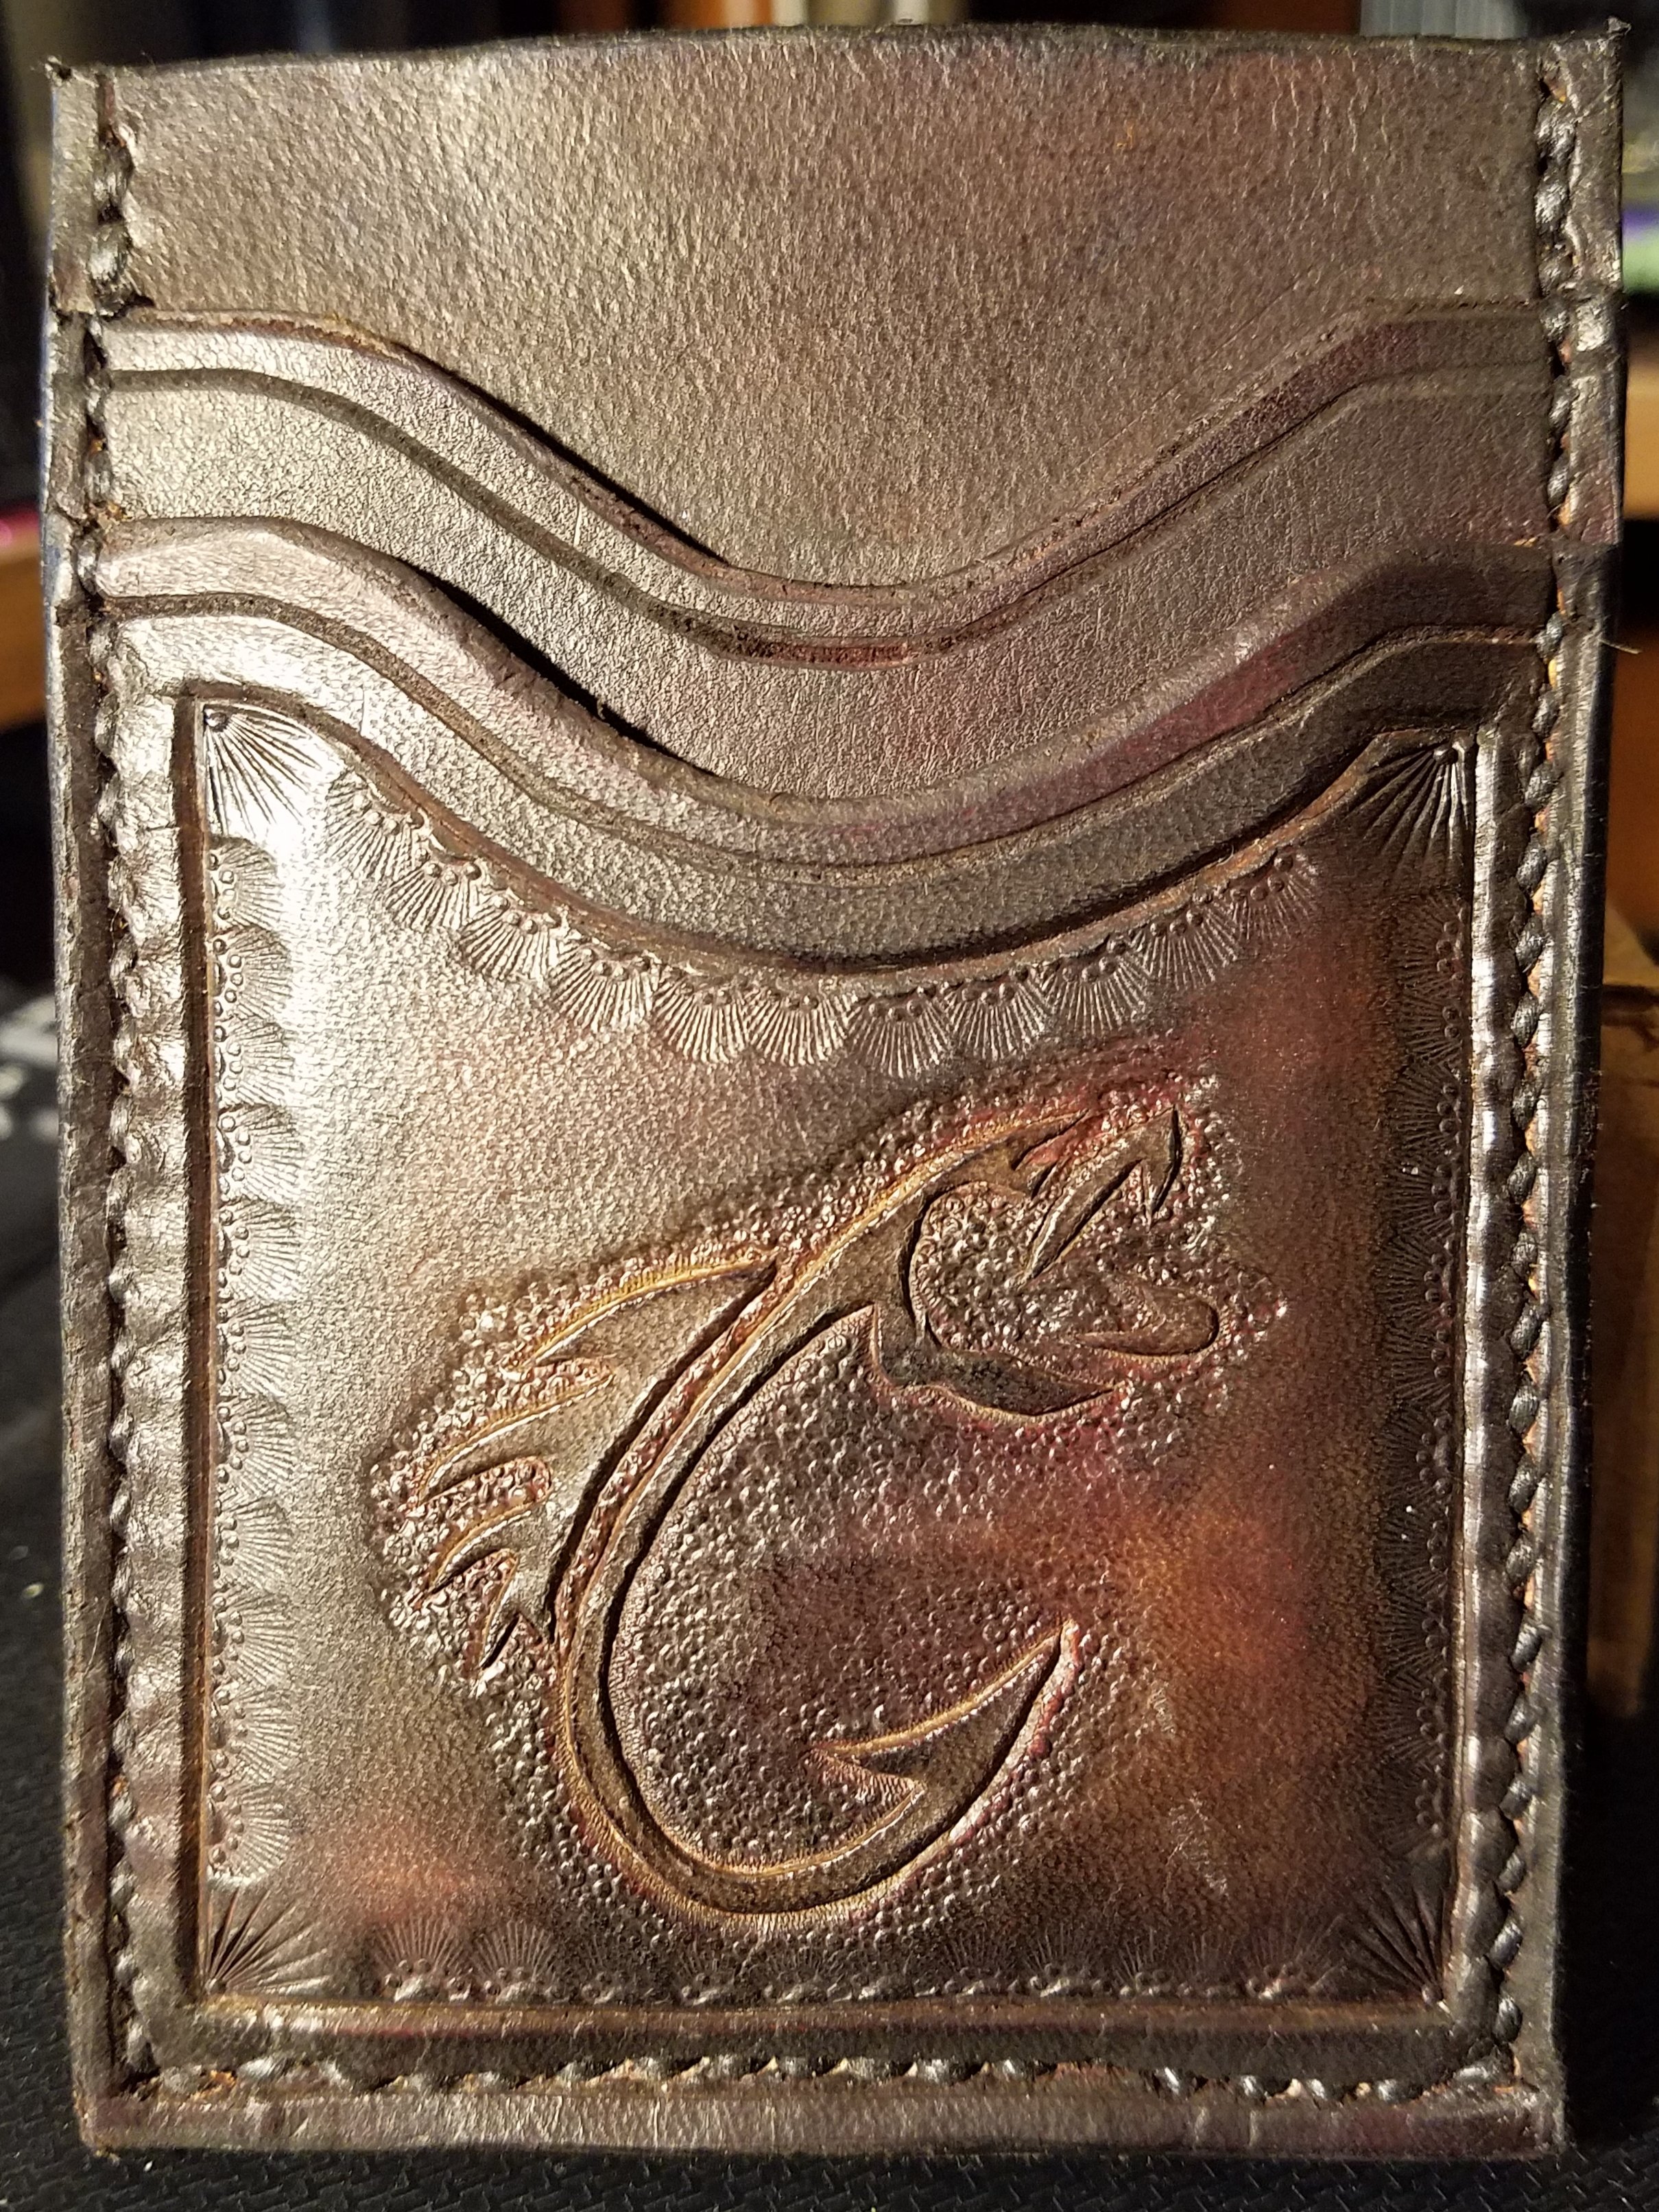 3 pocket minimalist wallet, hand tooled and stitched, $55.00